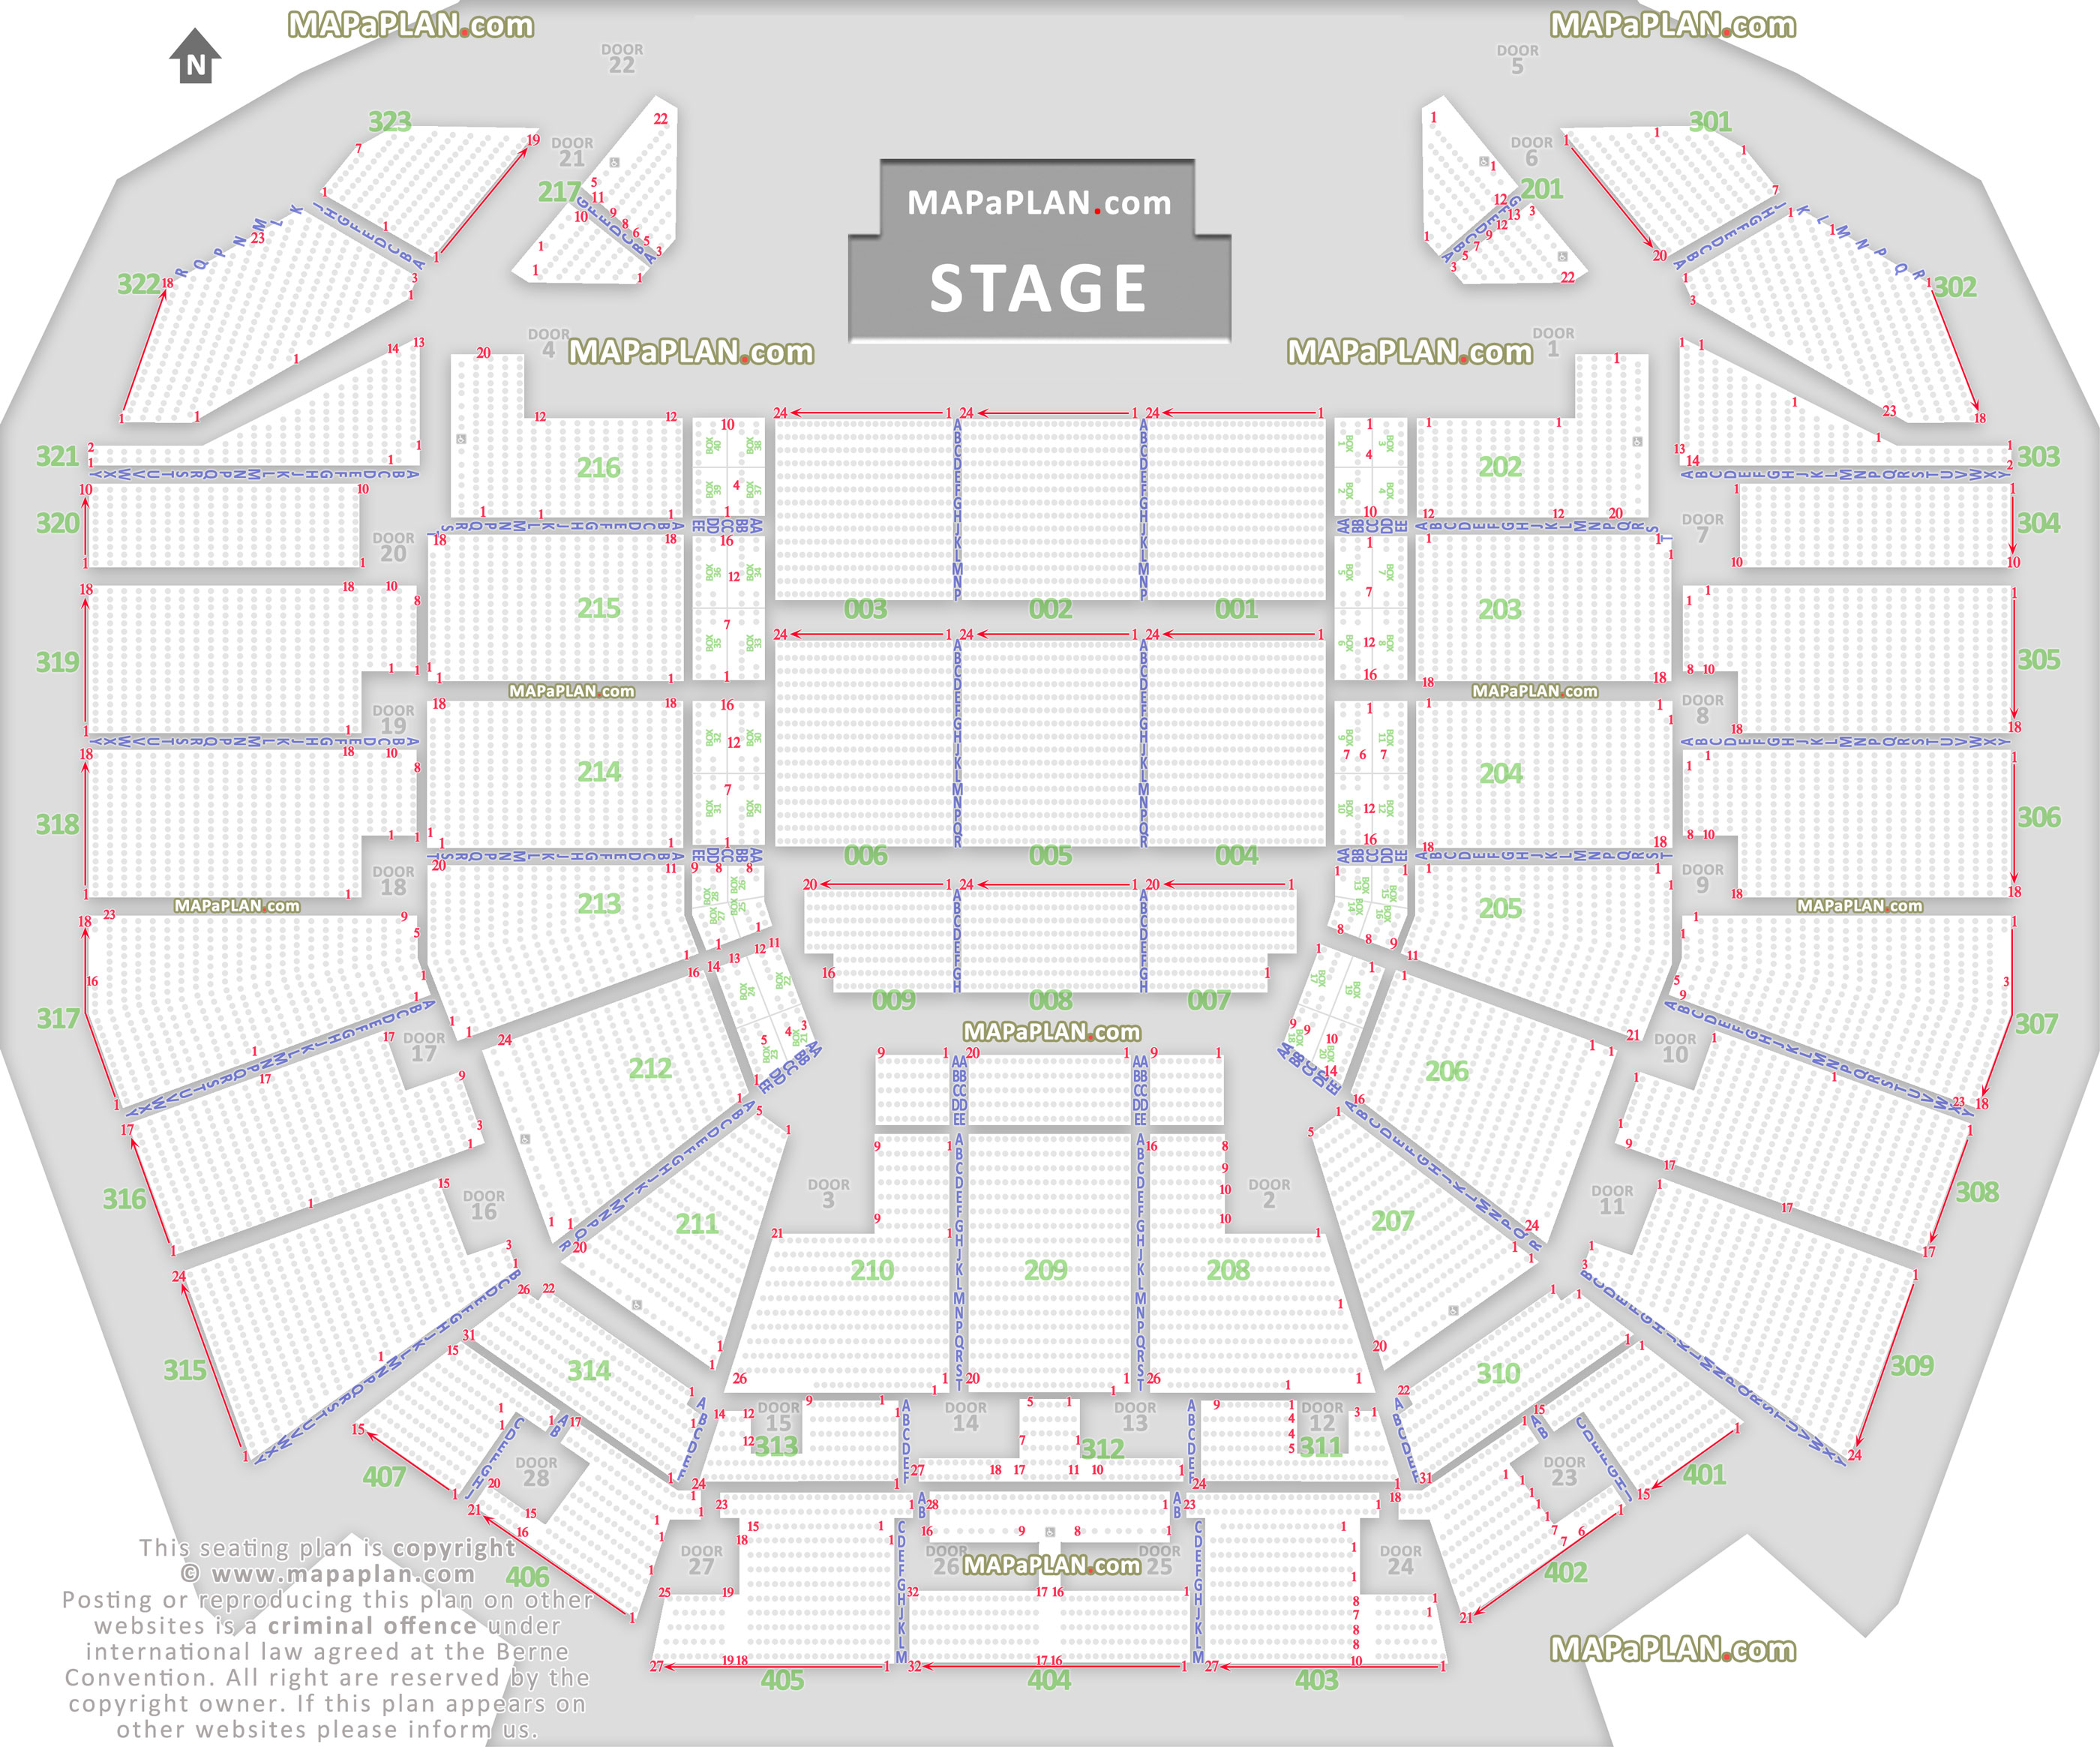 Section 215 At Allstate Arena For Concerts Rateyourseats Com